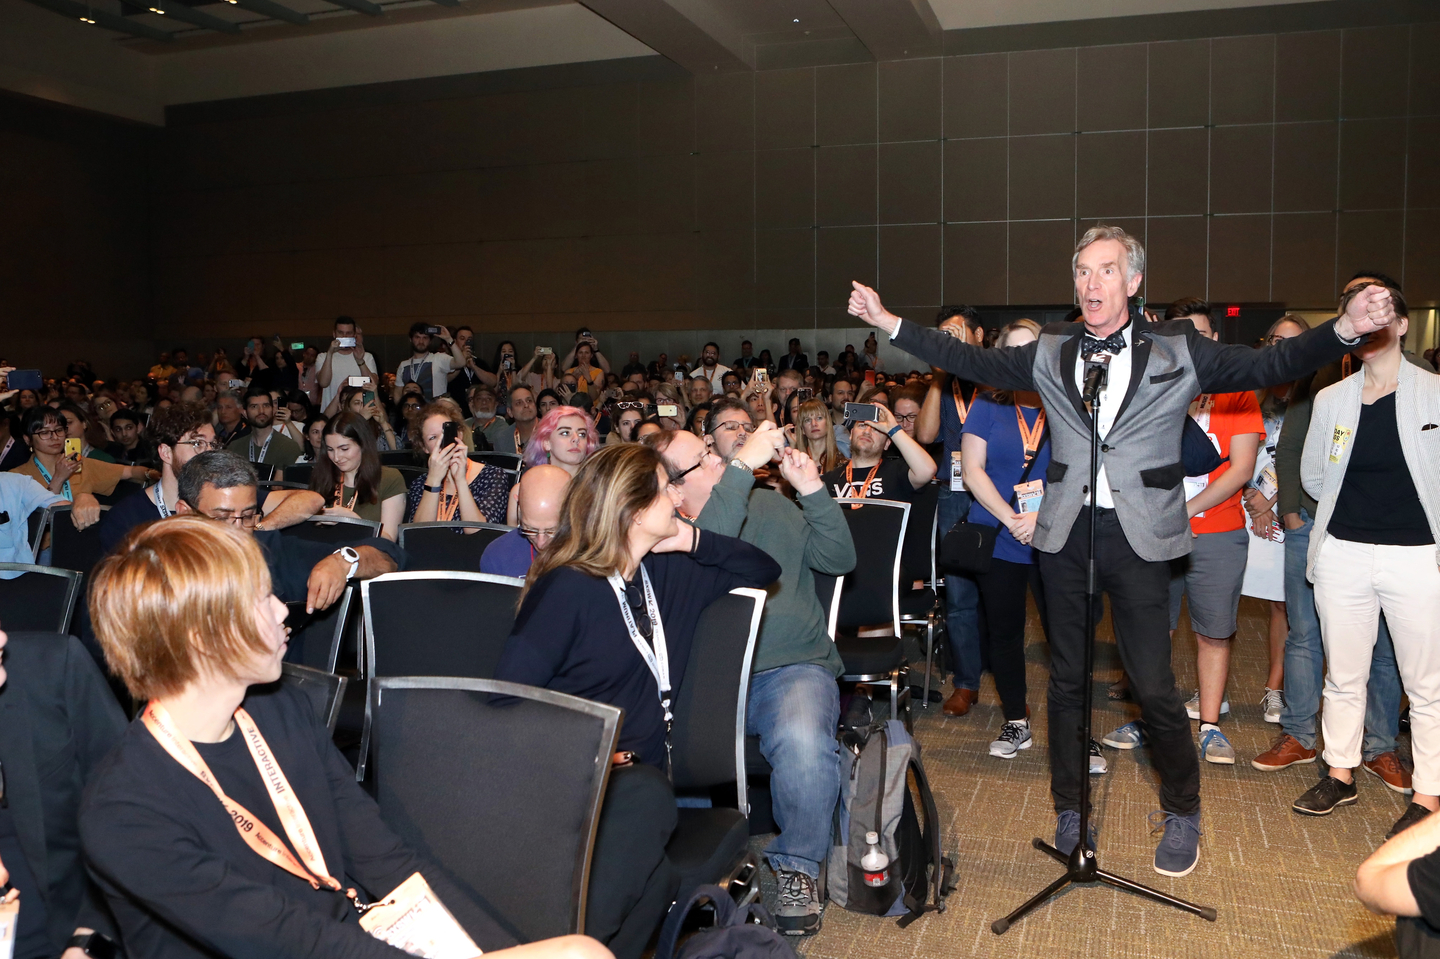 Bill Nye asks Alexandria Ocasio-Cortez a question from the audience. Photo by Samantha Burkardt/Getty Images for SXSW